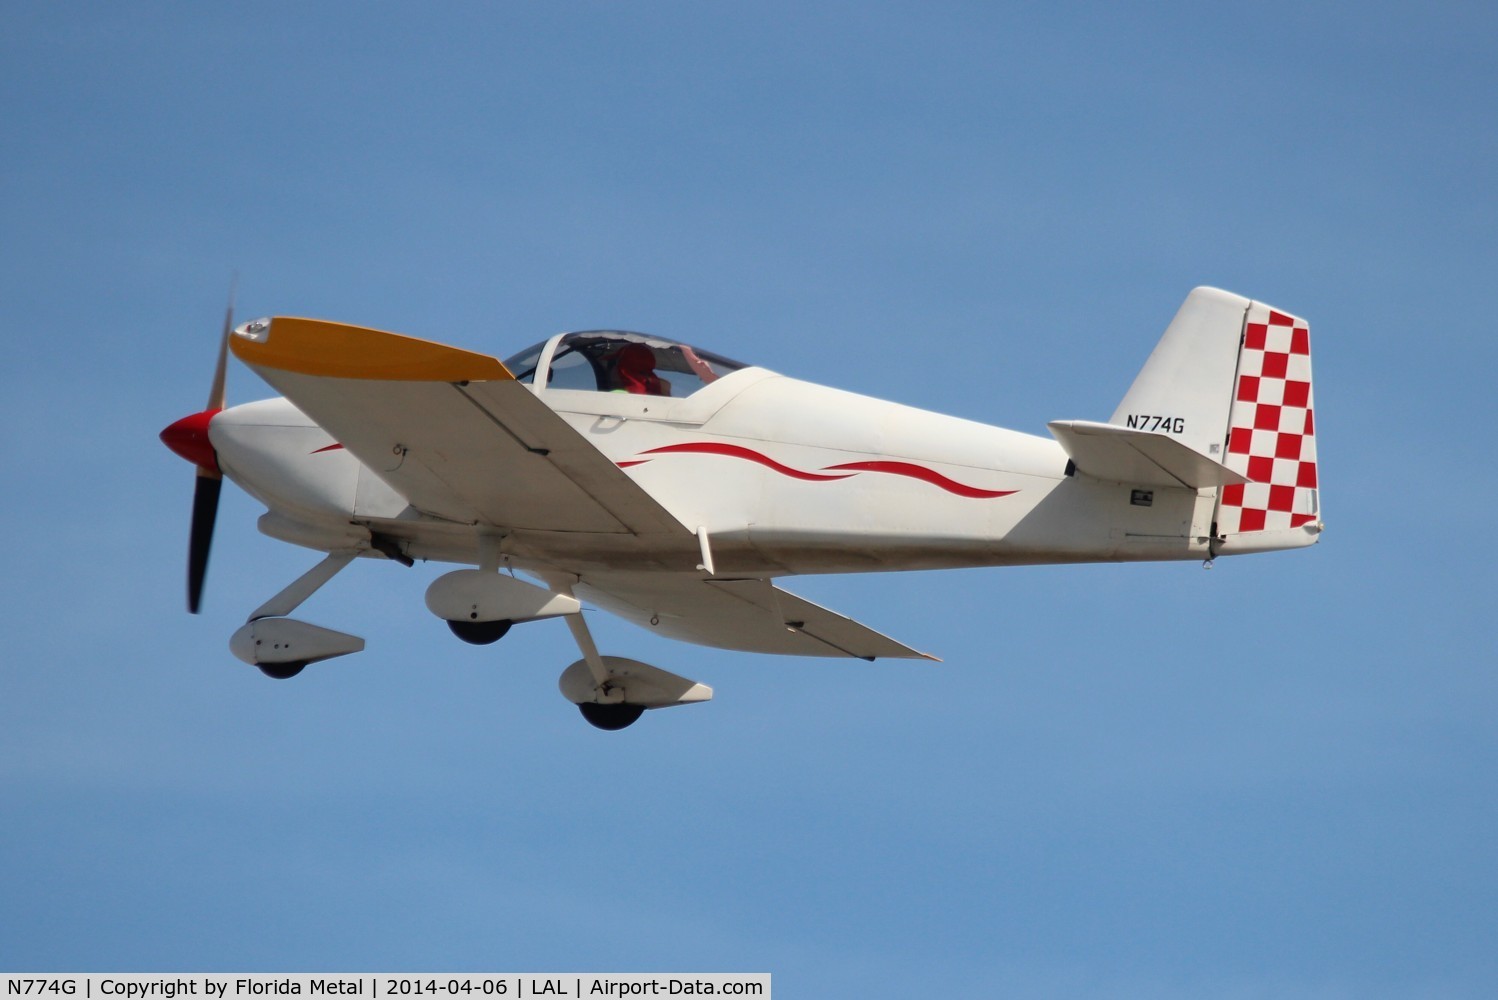 N774G, 2006 Vans RV-6A C/N 001, TJ Sport, resembles a Vans RV-6 - not an RV-10 like the Database suggested